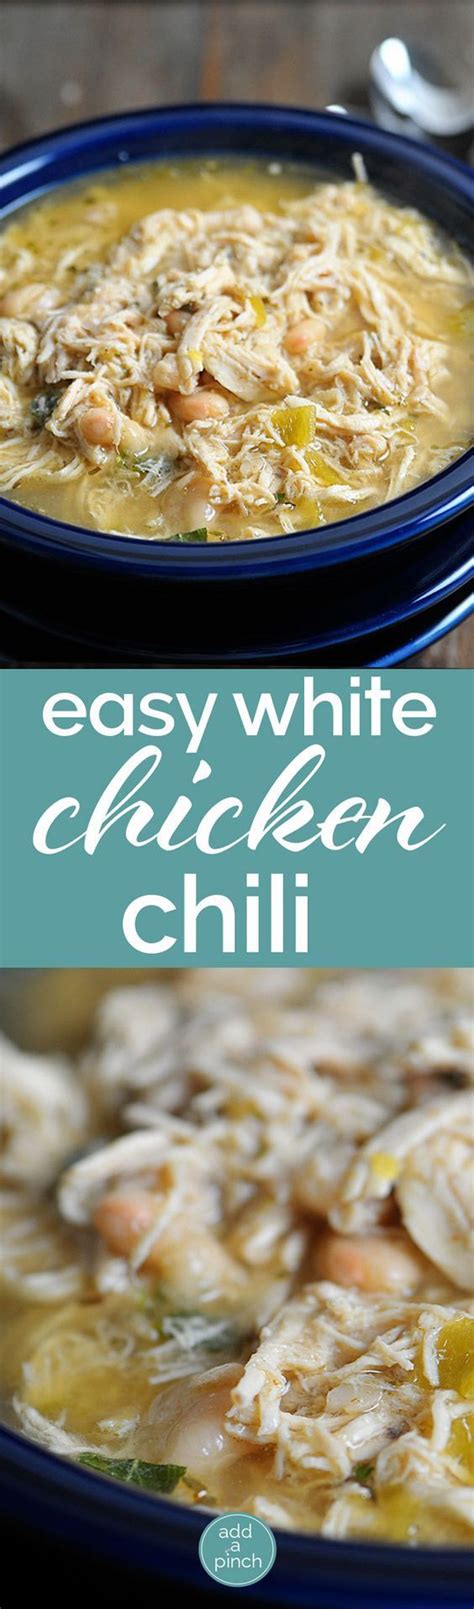 Return meat to slow cooker, and add in cumin, oregano and cayenne (if you feel like it needs a little more flavor, add in a seasoning packet of mccormick white chicken chili at the end of the day). white chili recipe pioneer woman